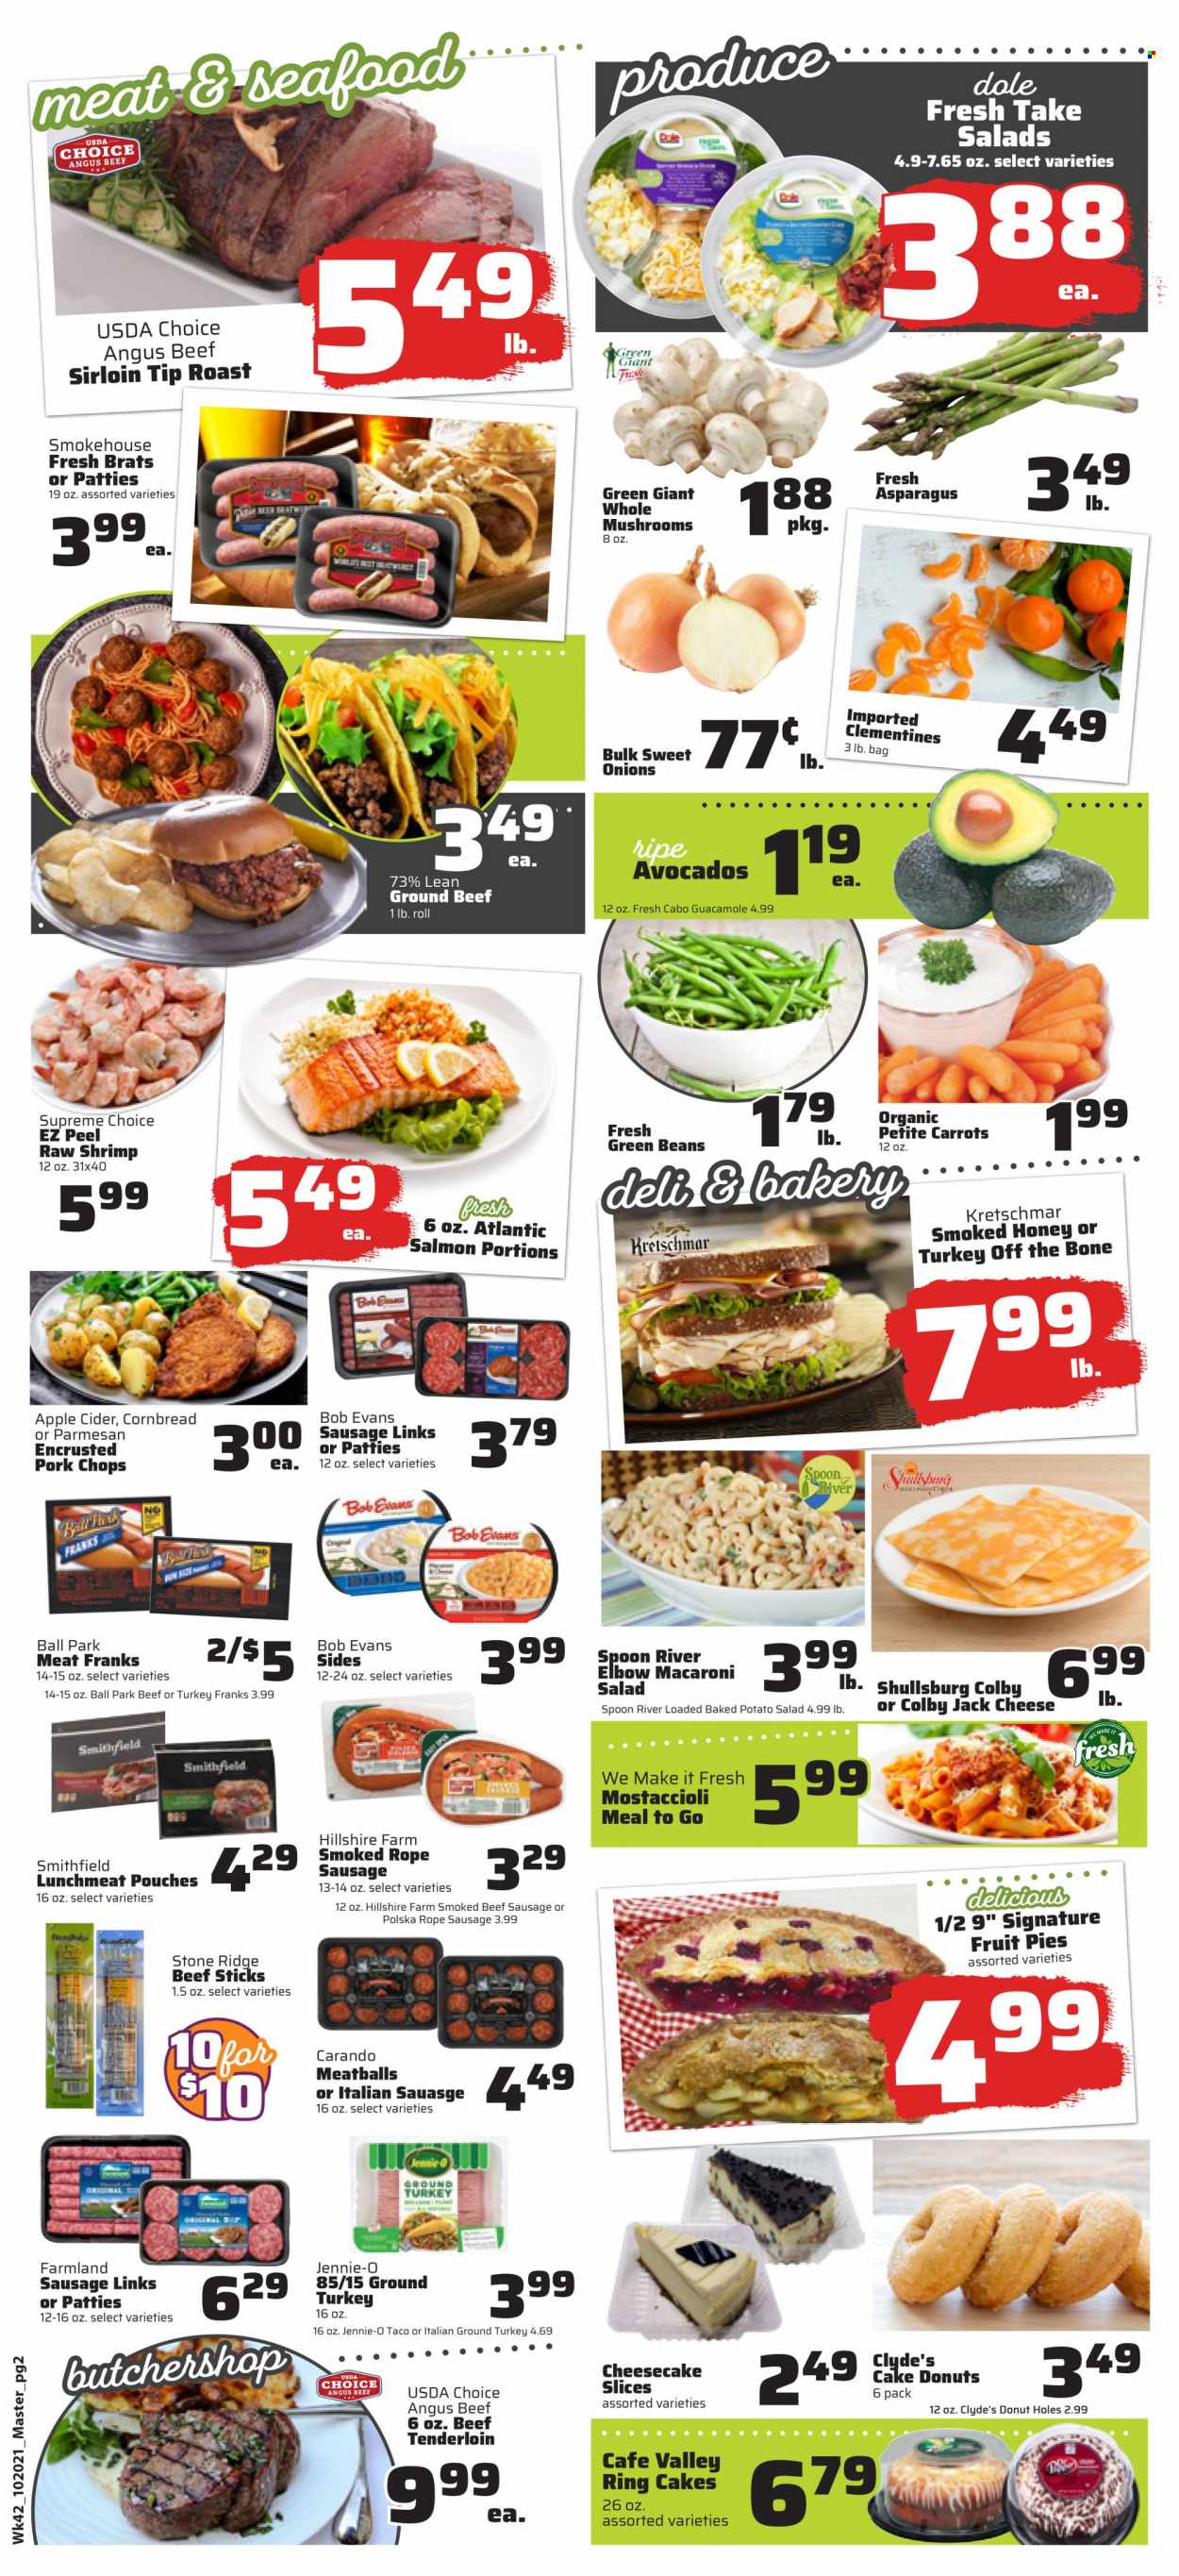 thumbnail - County Market Flyer - 10/20/2021 - 10/26/2021 - Sales products - mushrooms, cake, corn bread, donut holes, cheesecake, asparagus, beans, carrots, green beans, salad, Dole, salmon, seafood, shrimps, meatballs, Bob Evans, Hillshire Farm, sausage, beef sticks, guacamole, potato salad, macaroni salad, lunch meat, Colby cheese, parmesan, cheese, apple cider, cider, ground turkey, beef meat, beef sirloin, ground beef, beef tenderloin, pork chops, pork meat, clementines. Page 2.